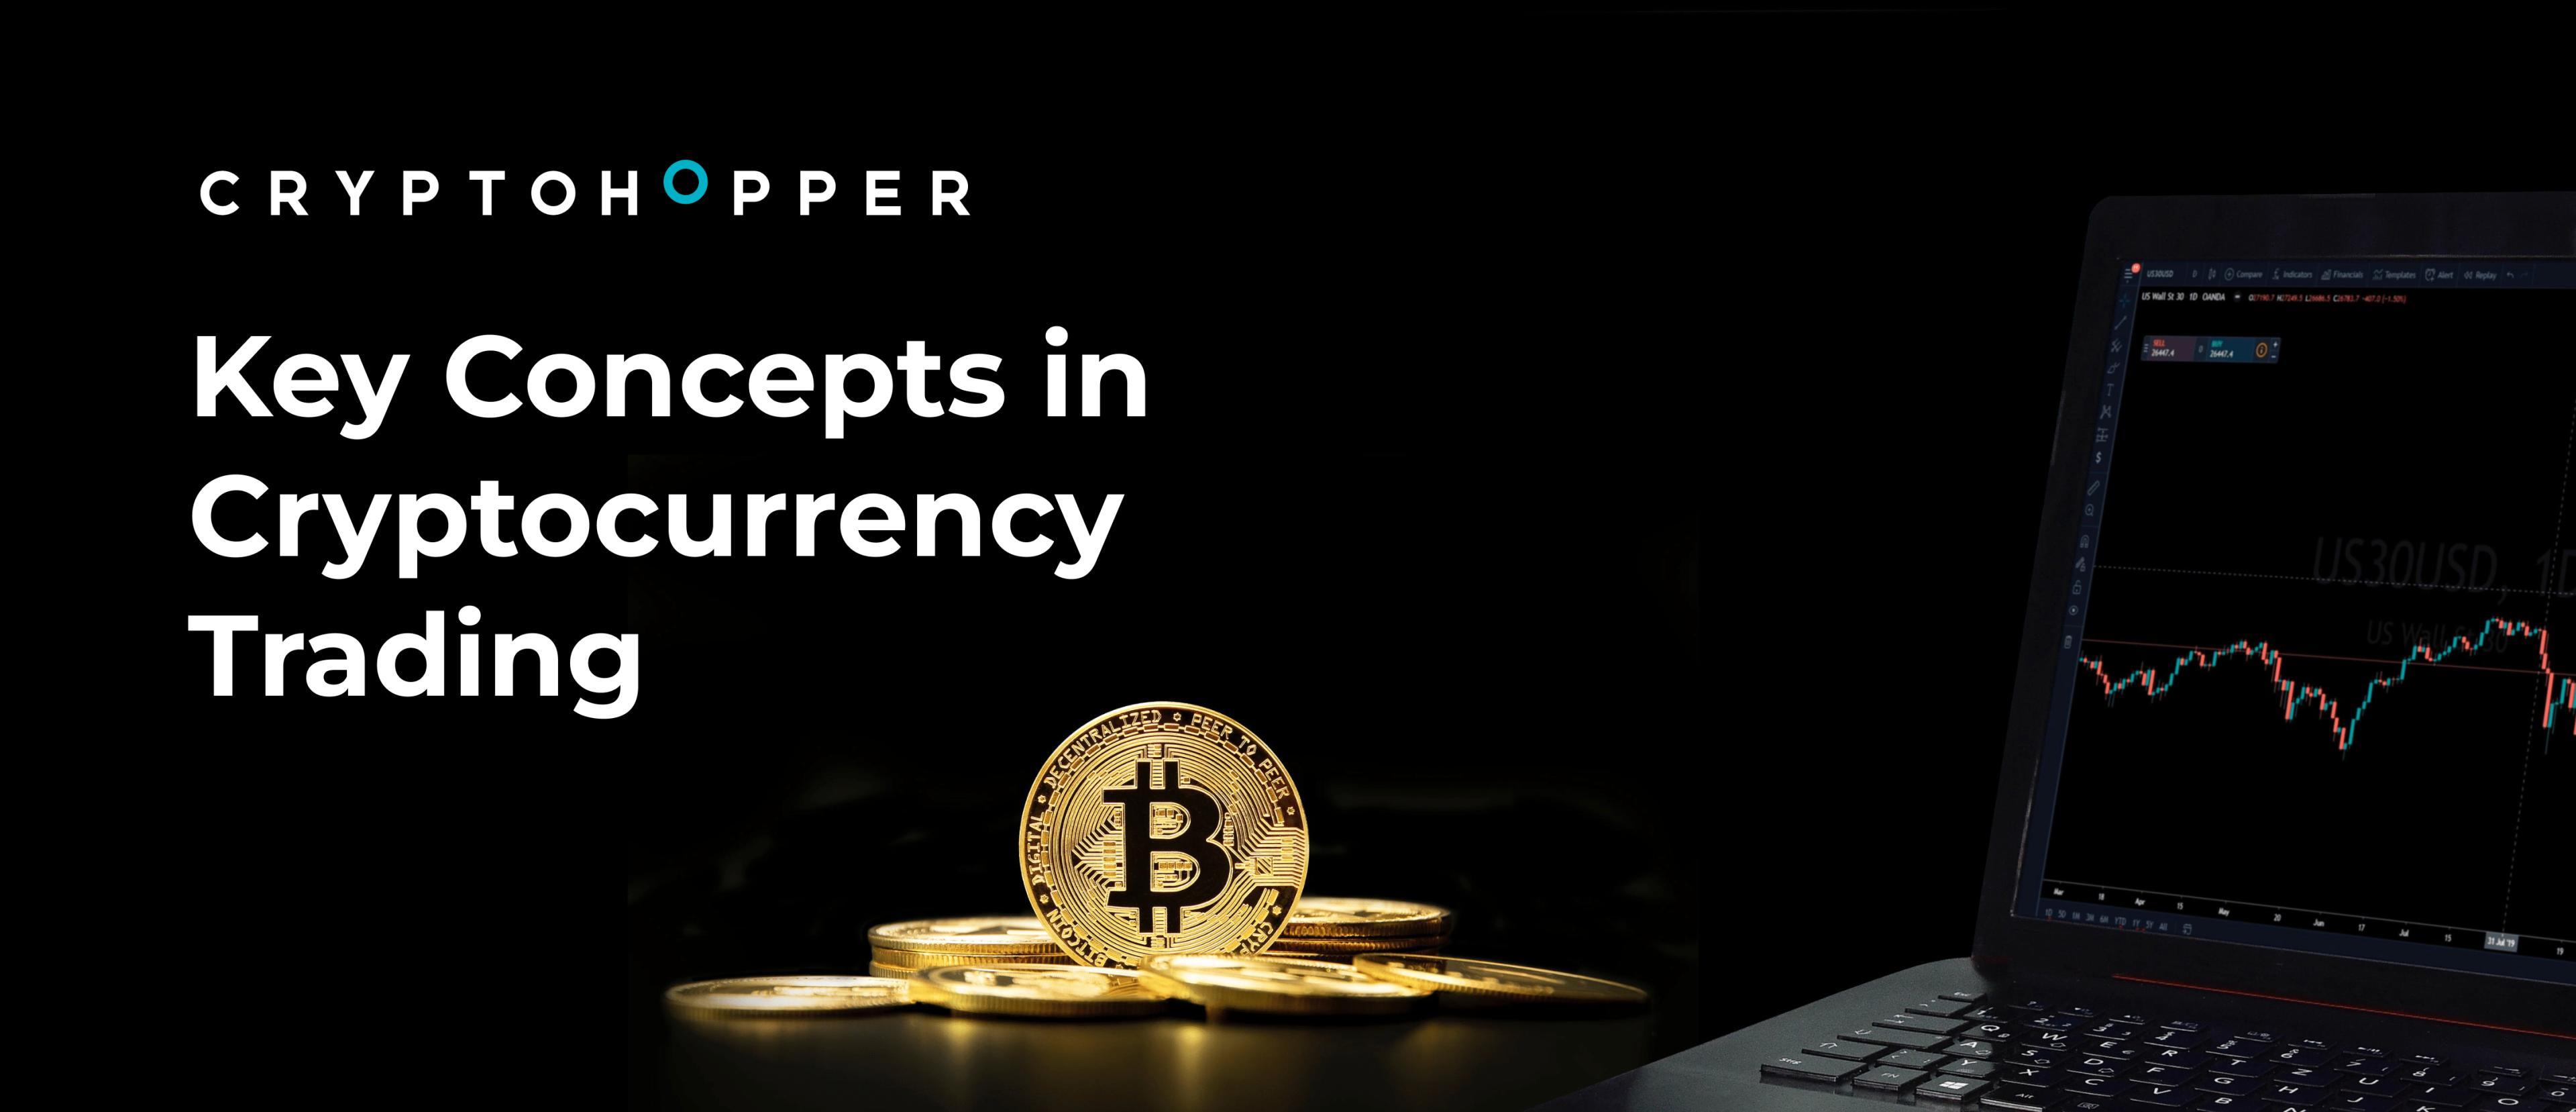 Key Concepts in Cryptocurrency Trading